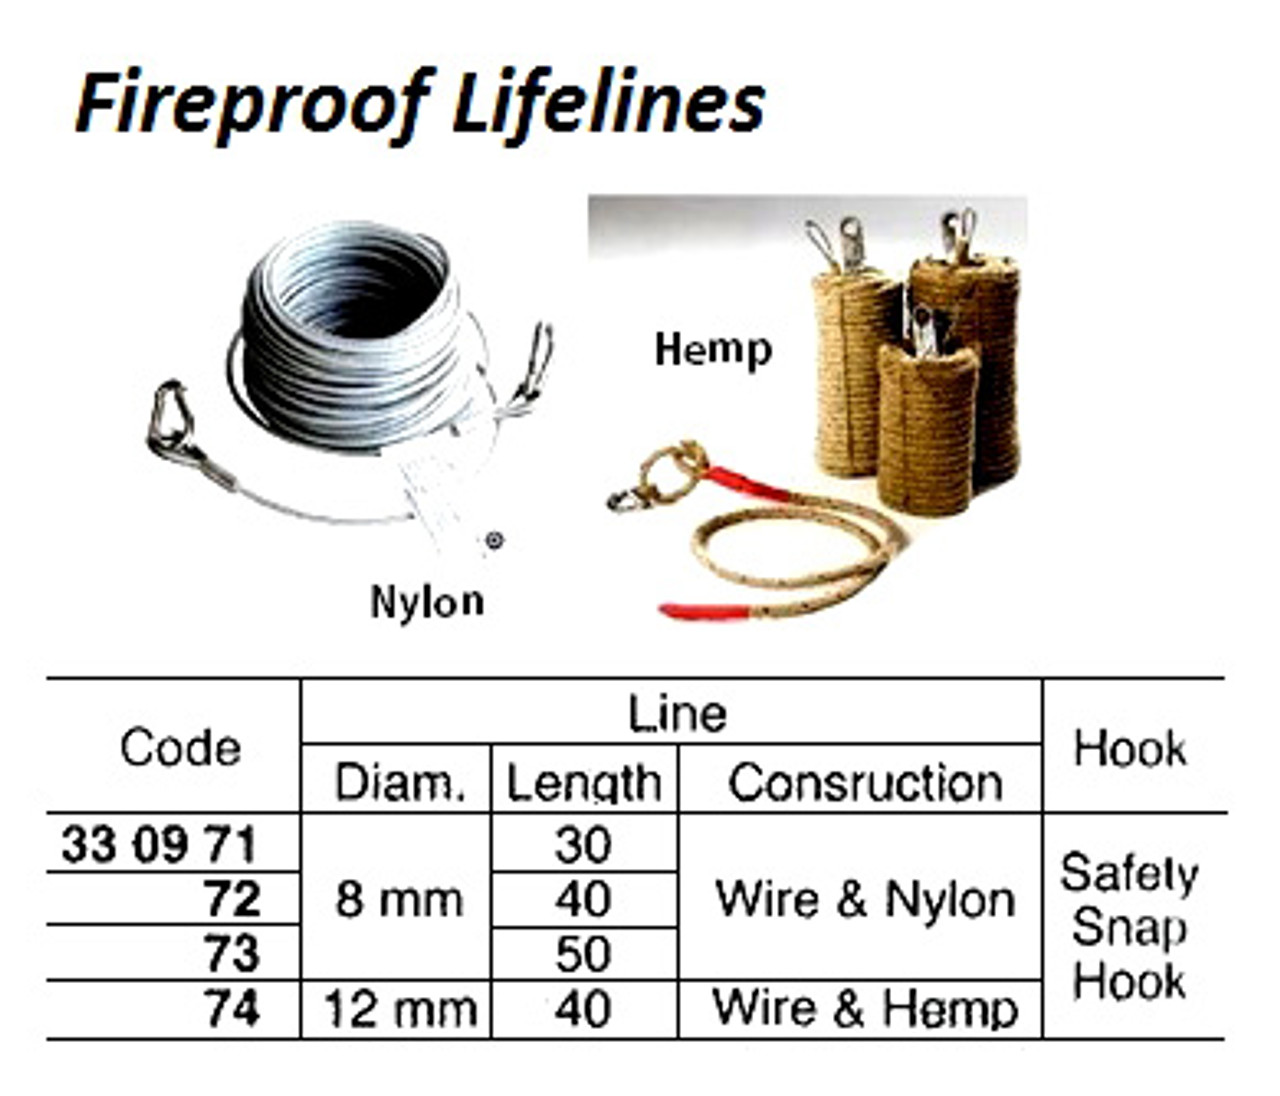 IMPA 330972 SAFETY LIFELINE 12mmx40mtr. FIREPROOF WITH SAFETY HOOK